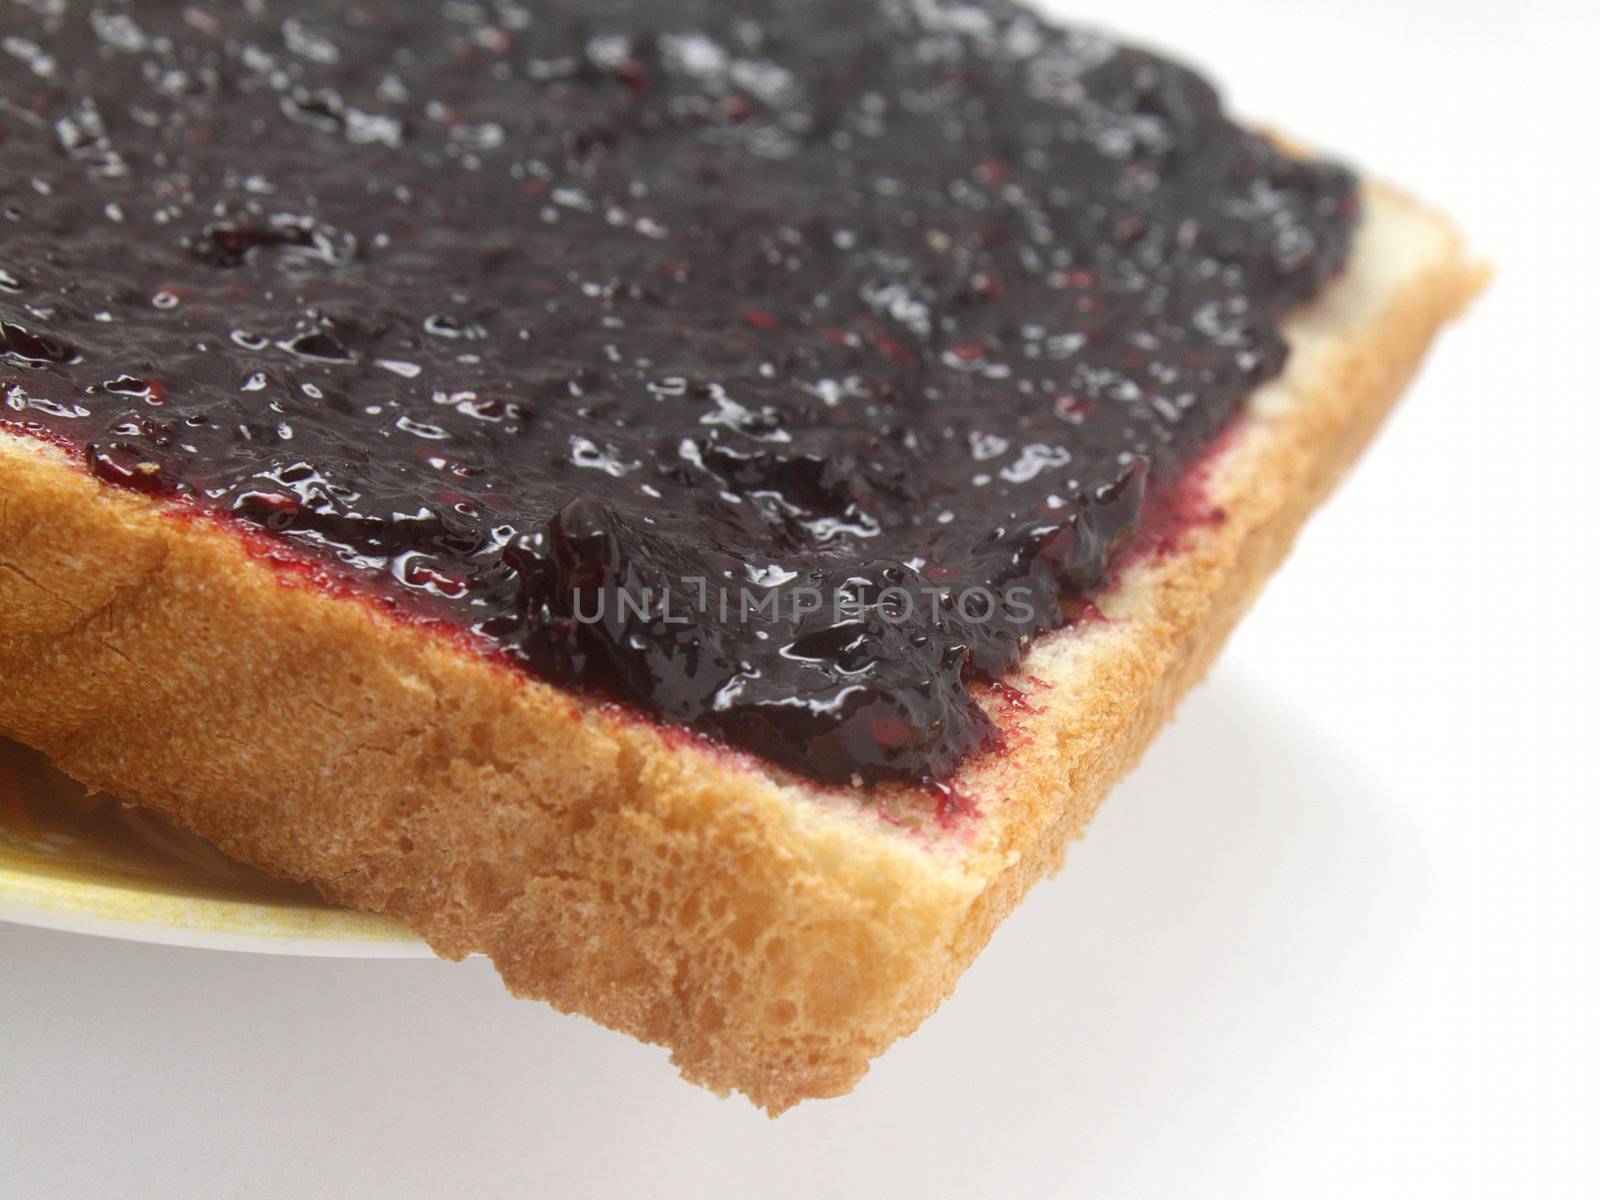 Toast with blackberry jam by pulen